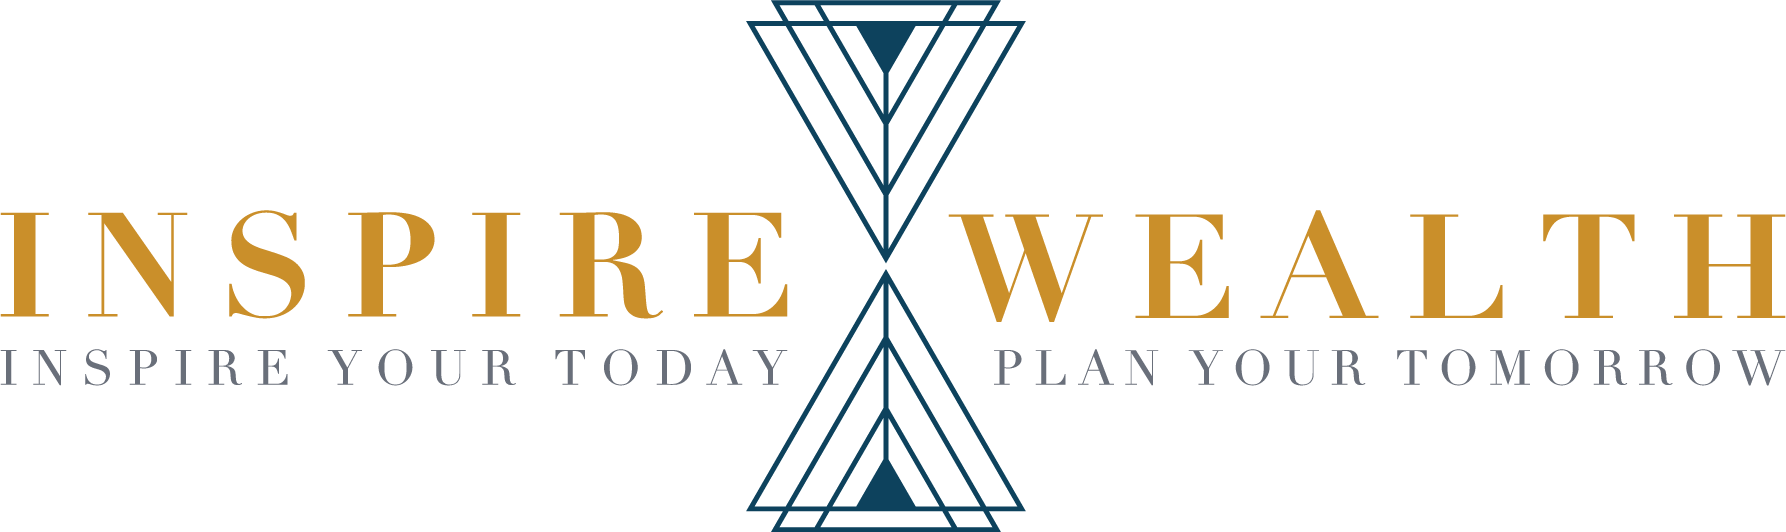 Inspire Wealth: Inspire Your Today, Plan Your Tomorrow